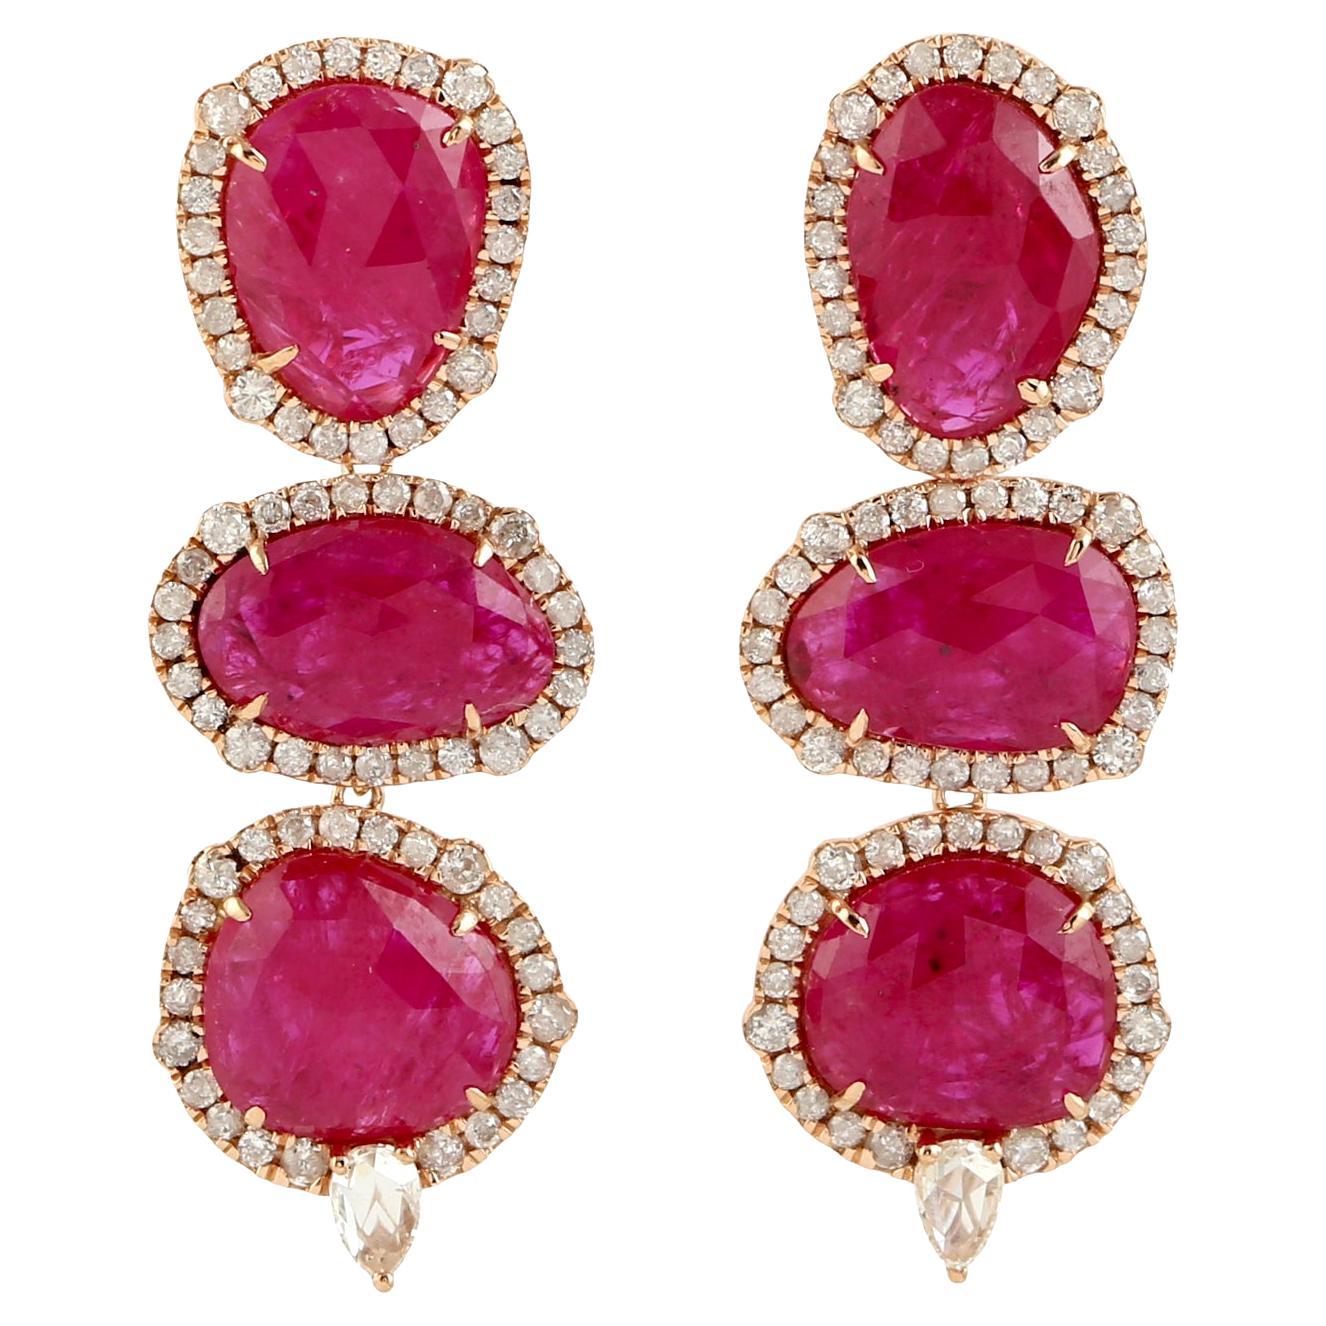 12.63ct Ruby 3 Tier Dangle Earrings With Diamonds Made In 18k Yellow Gold For Sale